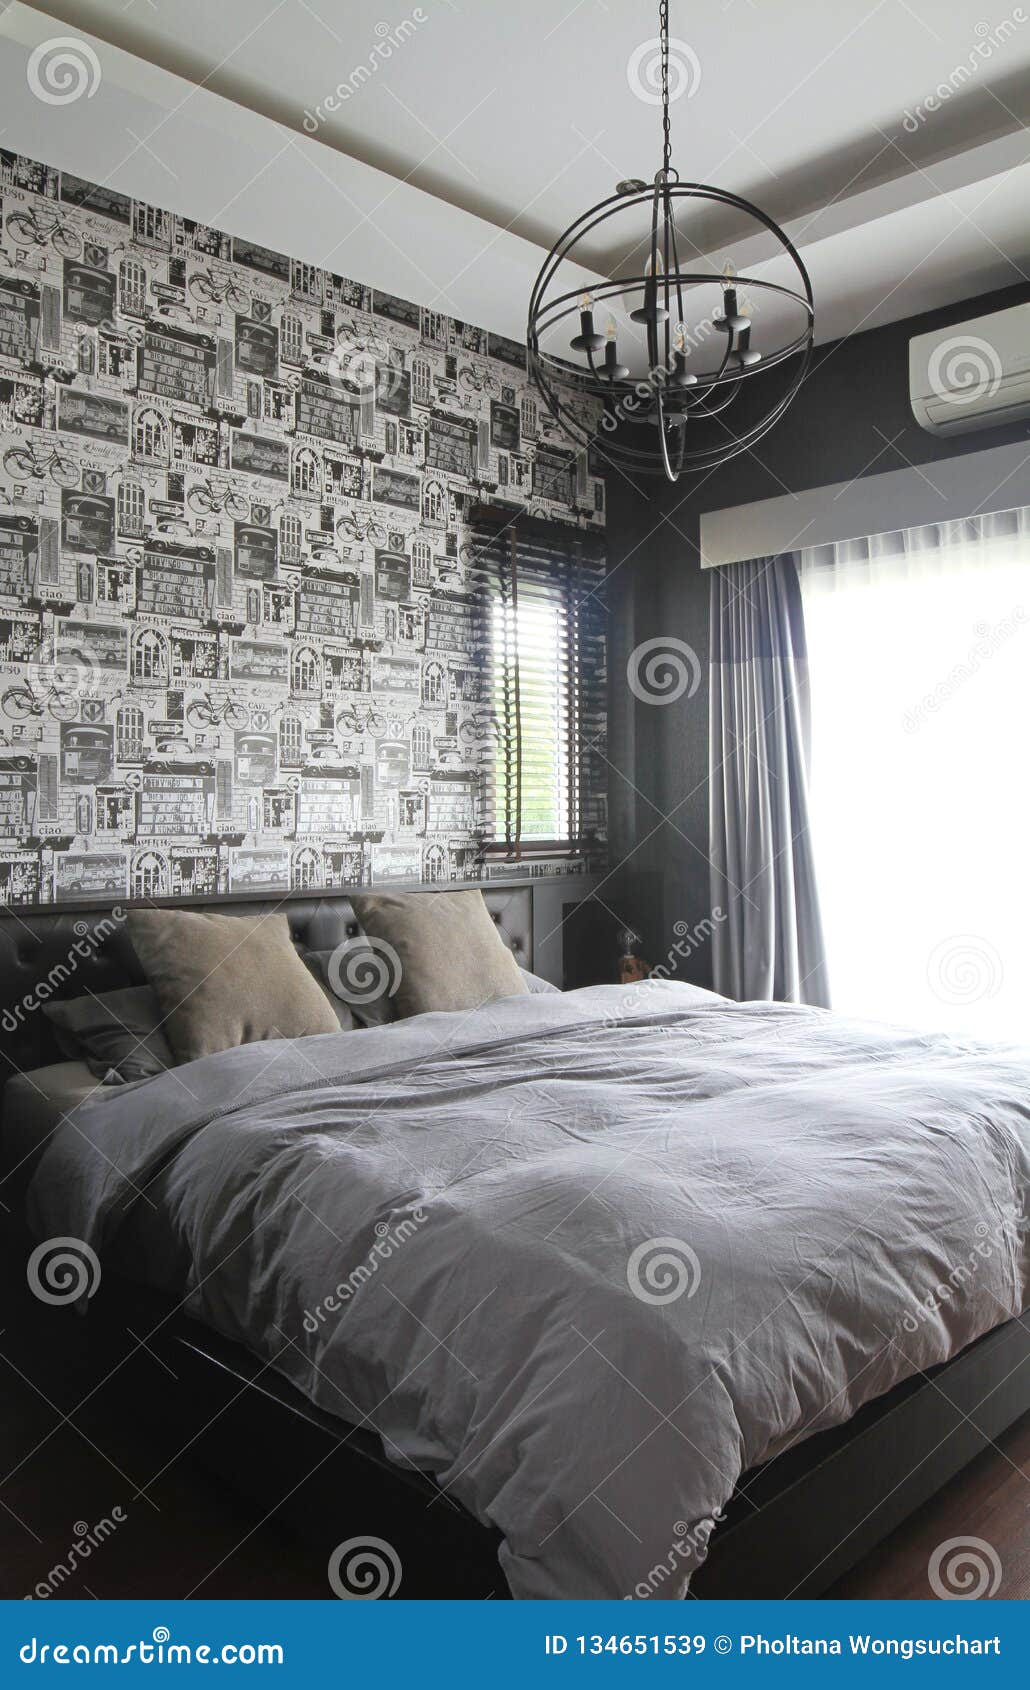 Bedroom Interior Modern Contemporary Style Stock Image